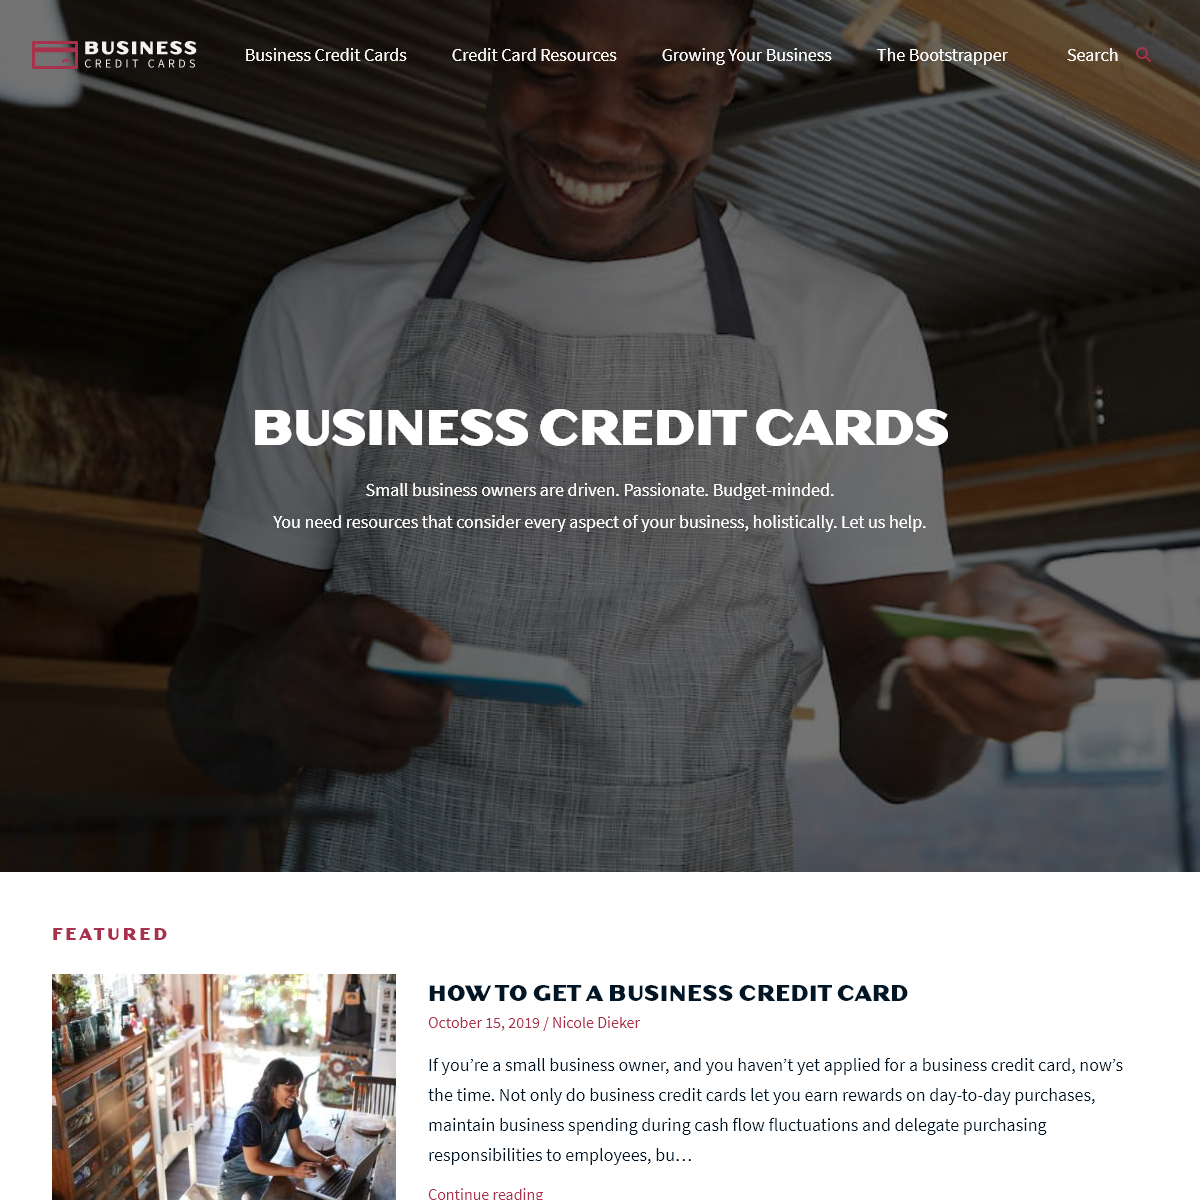 A complete backup of businesscreditcards.com